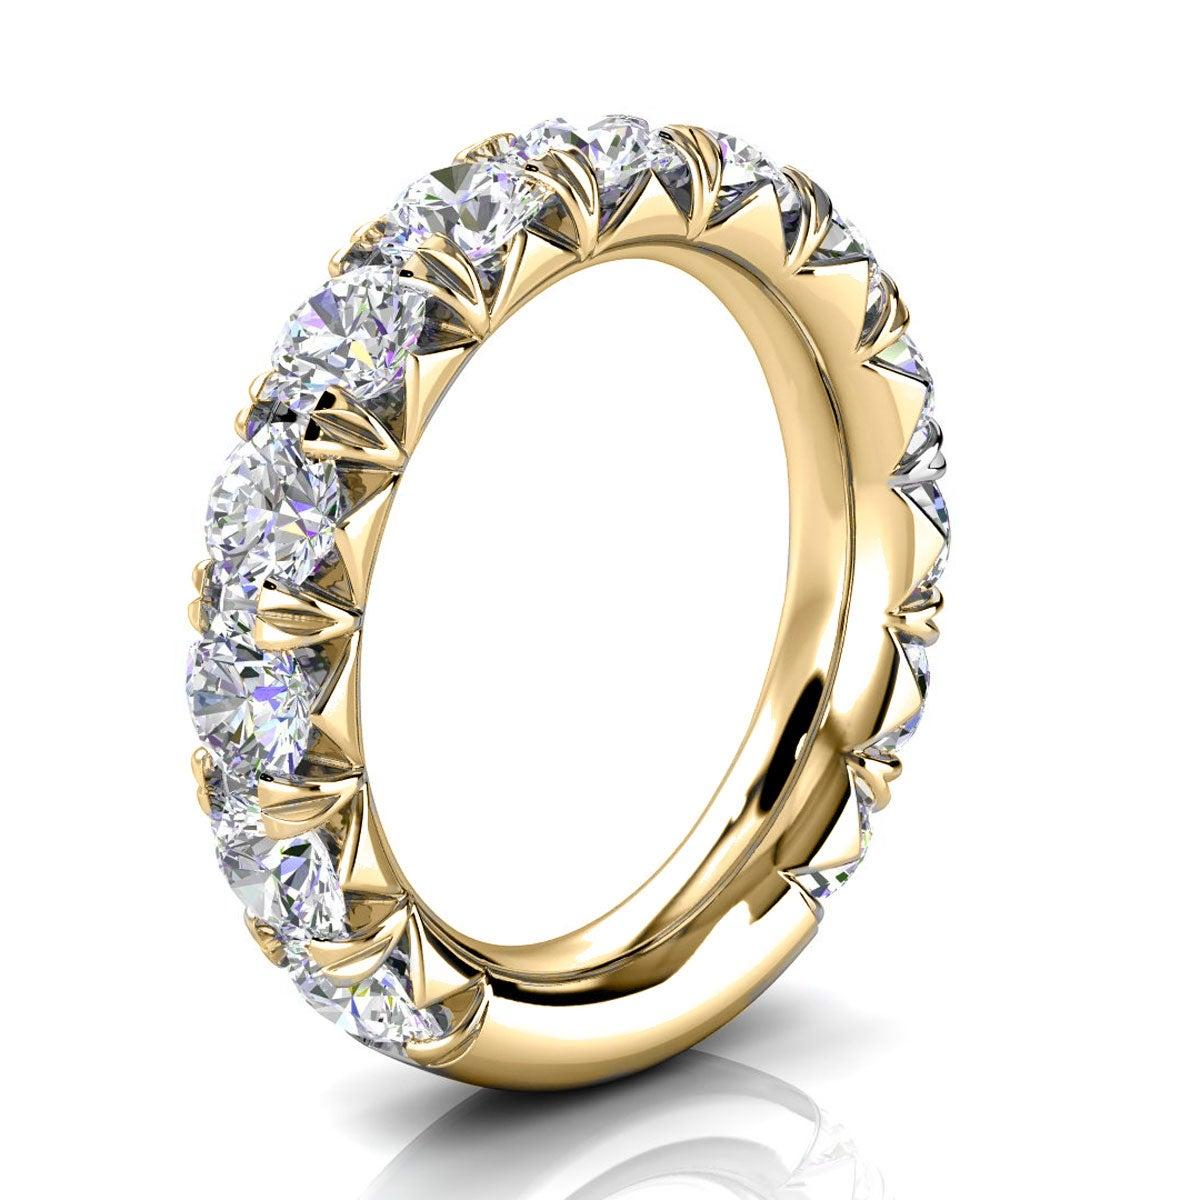 For Sale:  14K Yellow Gold GIA French Pave Diamond Ring '3 Ct. Tw' 2